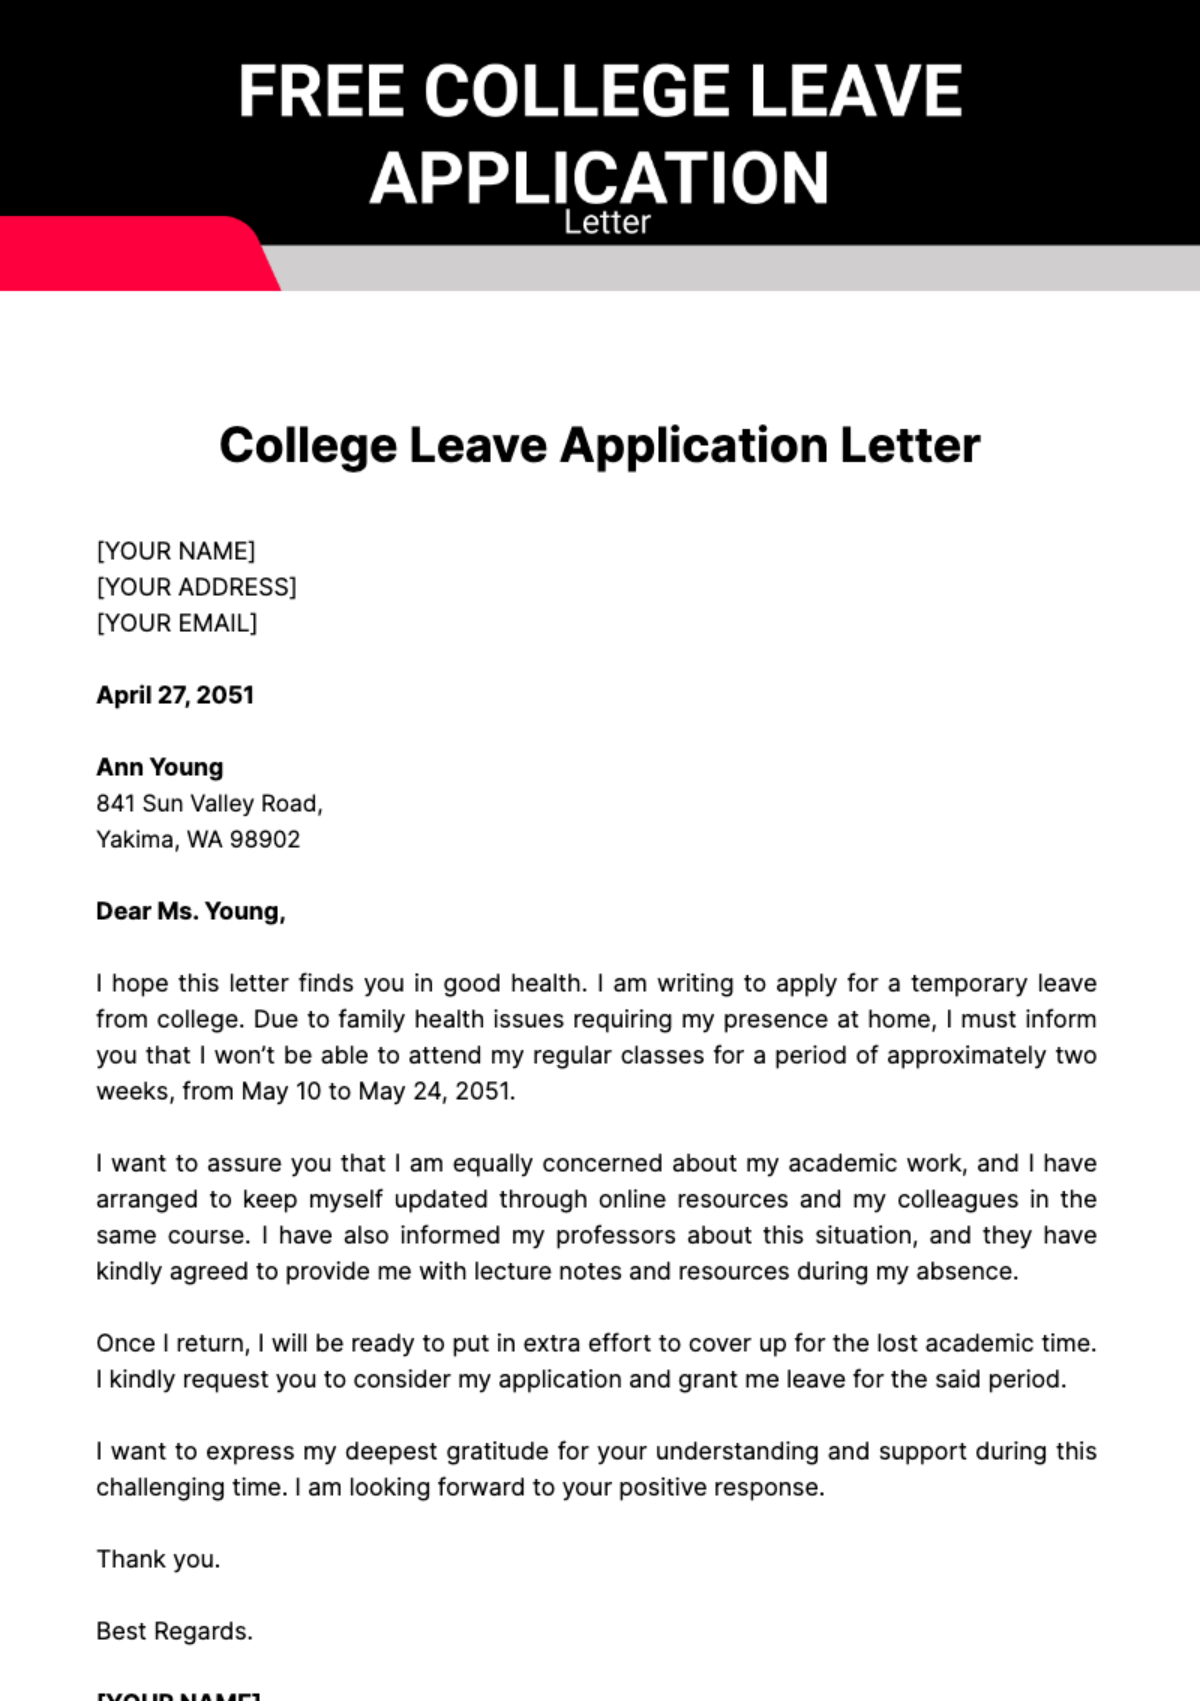 Free College Leave Application Letter Template